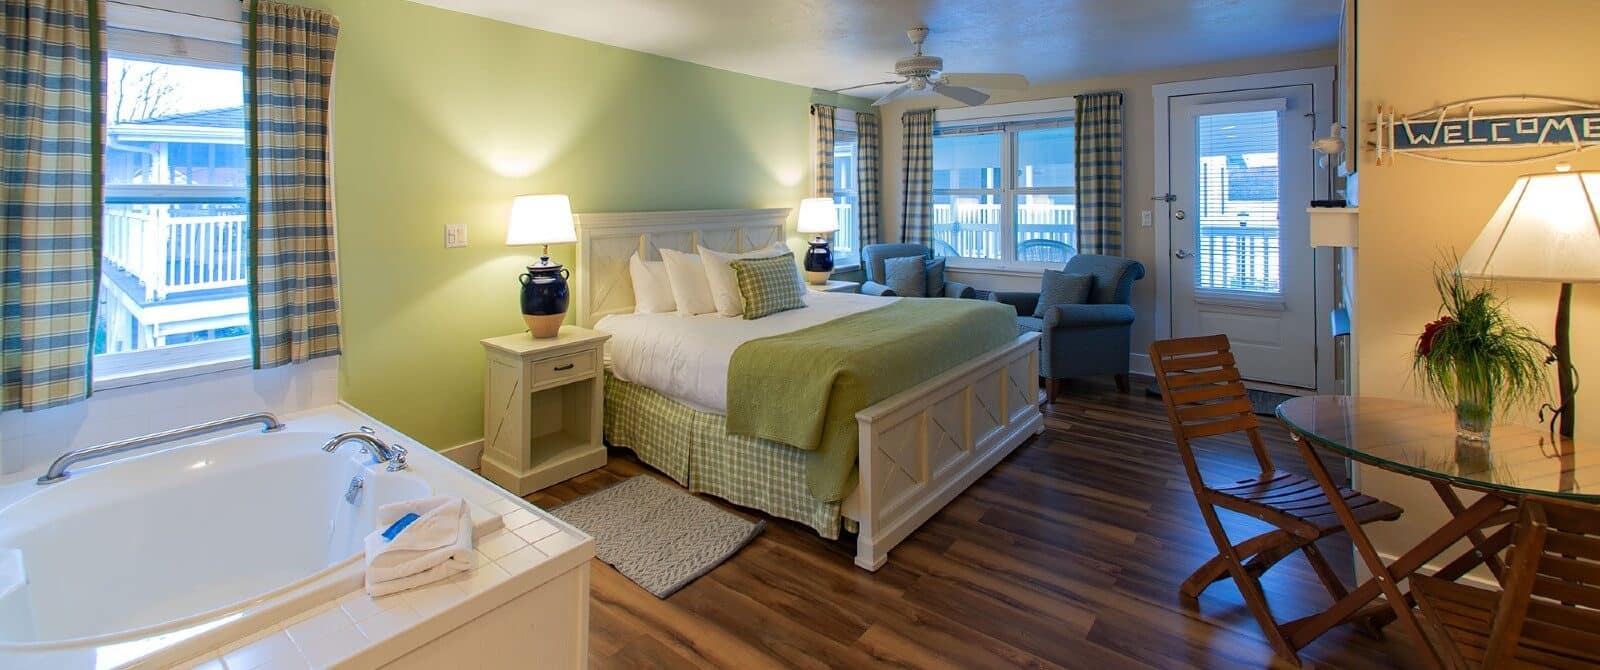 Bedroom with king bed, soaker tub, side tables with lamps, hardwood floors and sitting chairs by large window